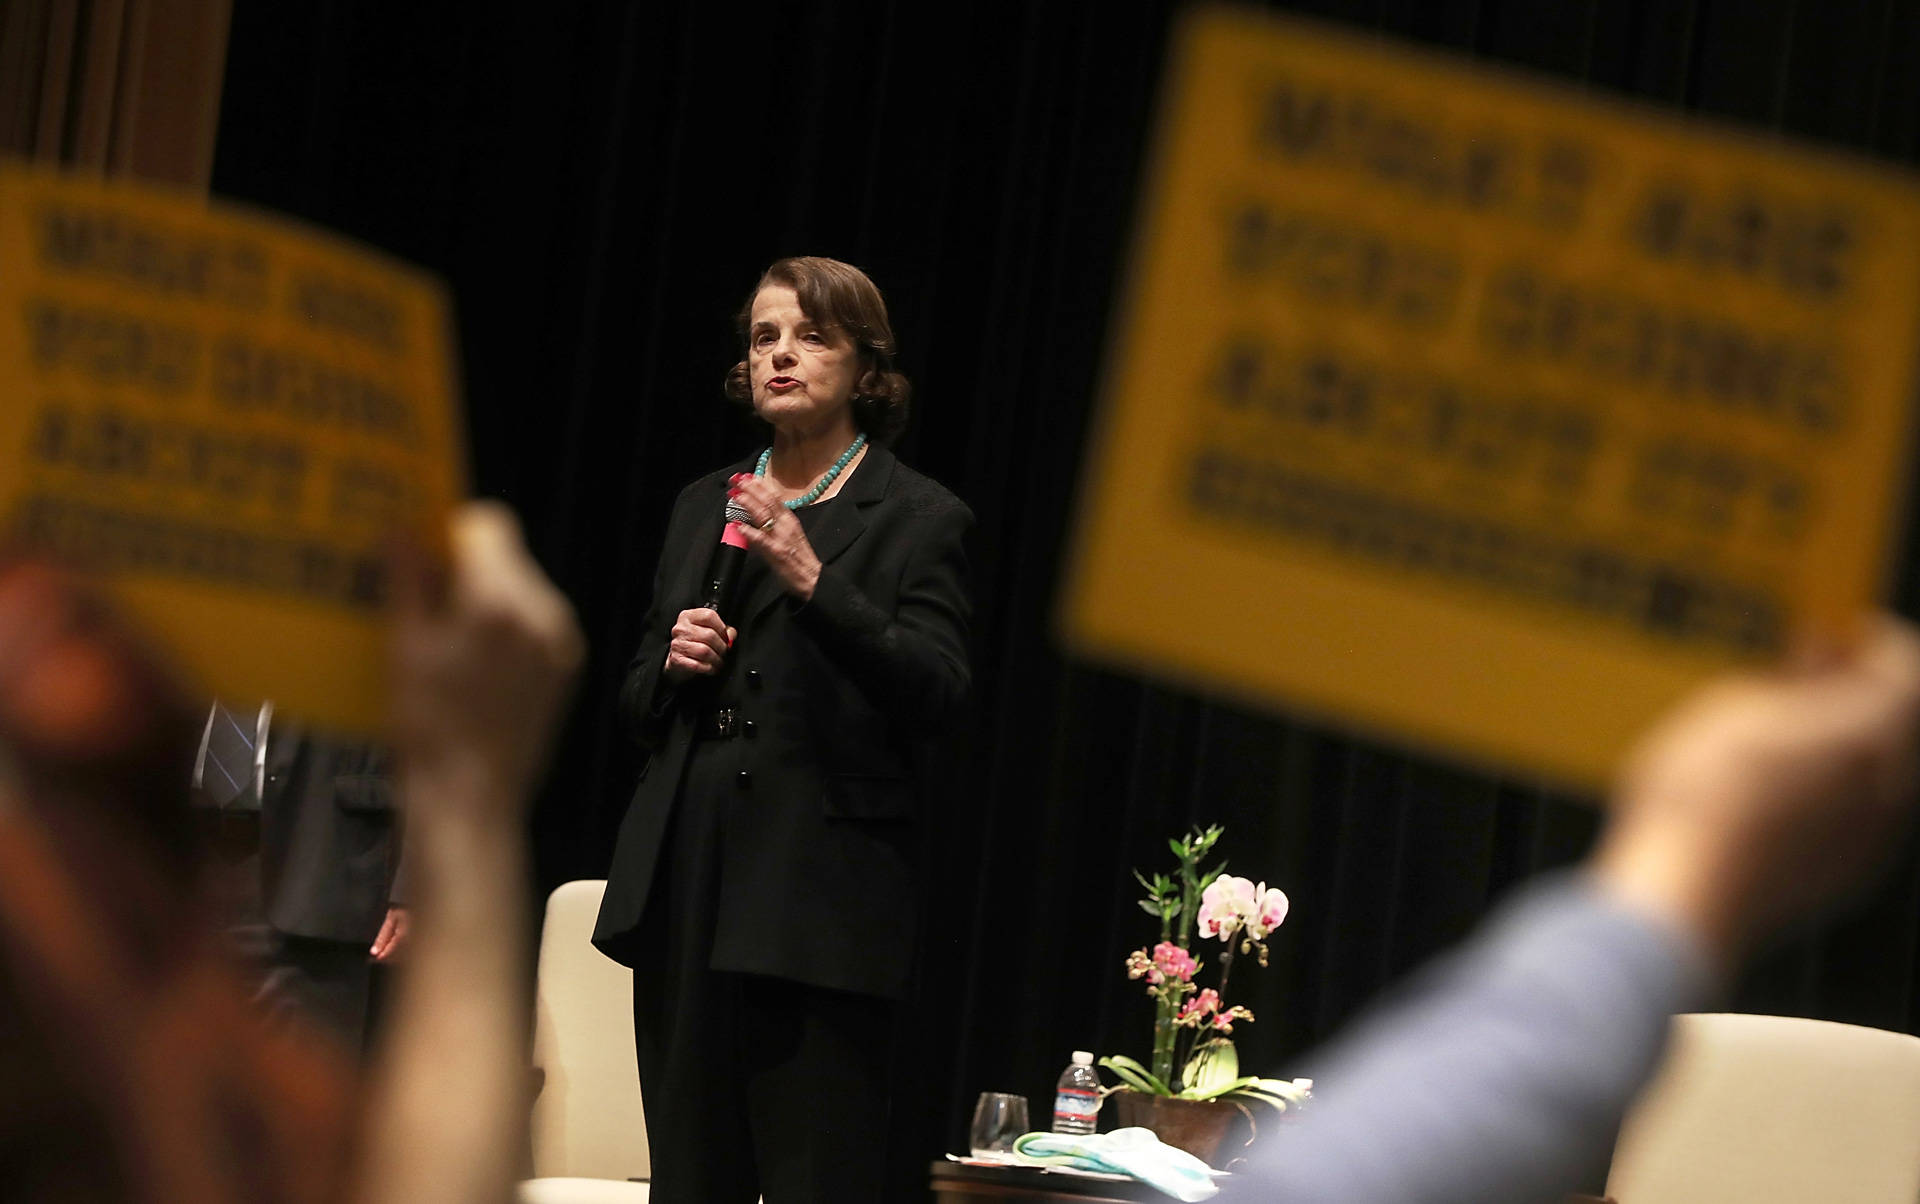 Sen. Dianne Feinstein speaks during a town hall meeting in San Francisco on April 17, 2017. Justin Sullivan/Getty Images